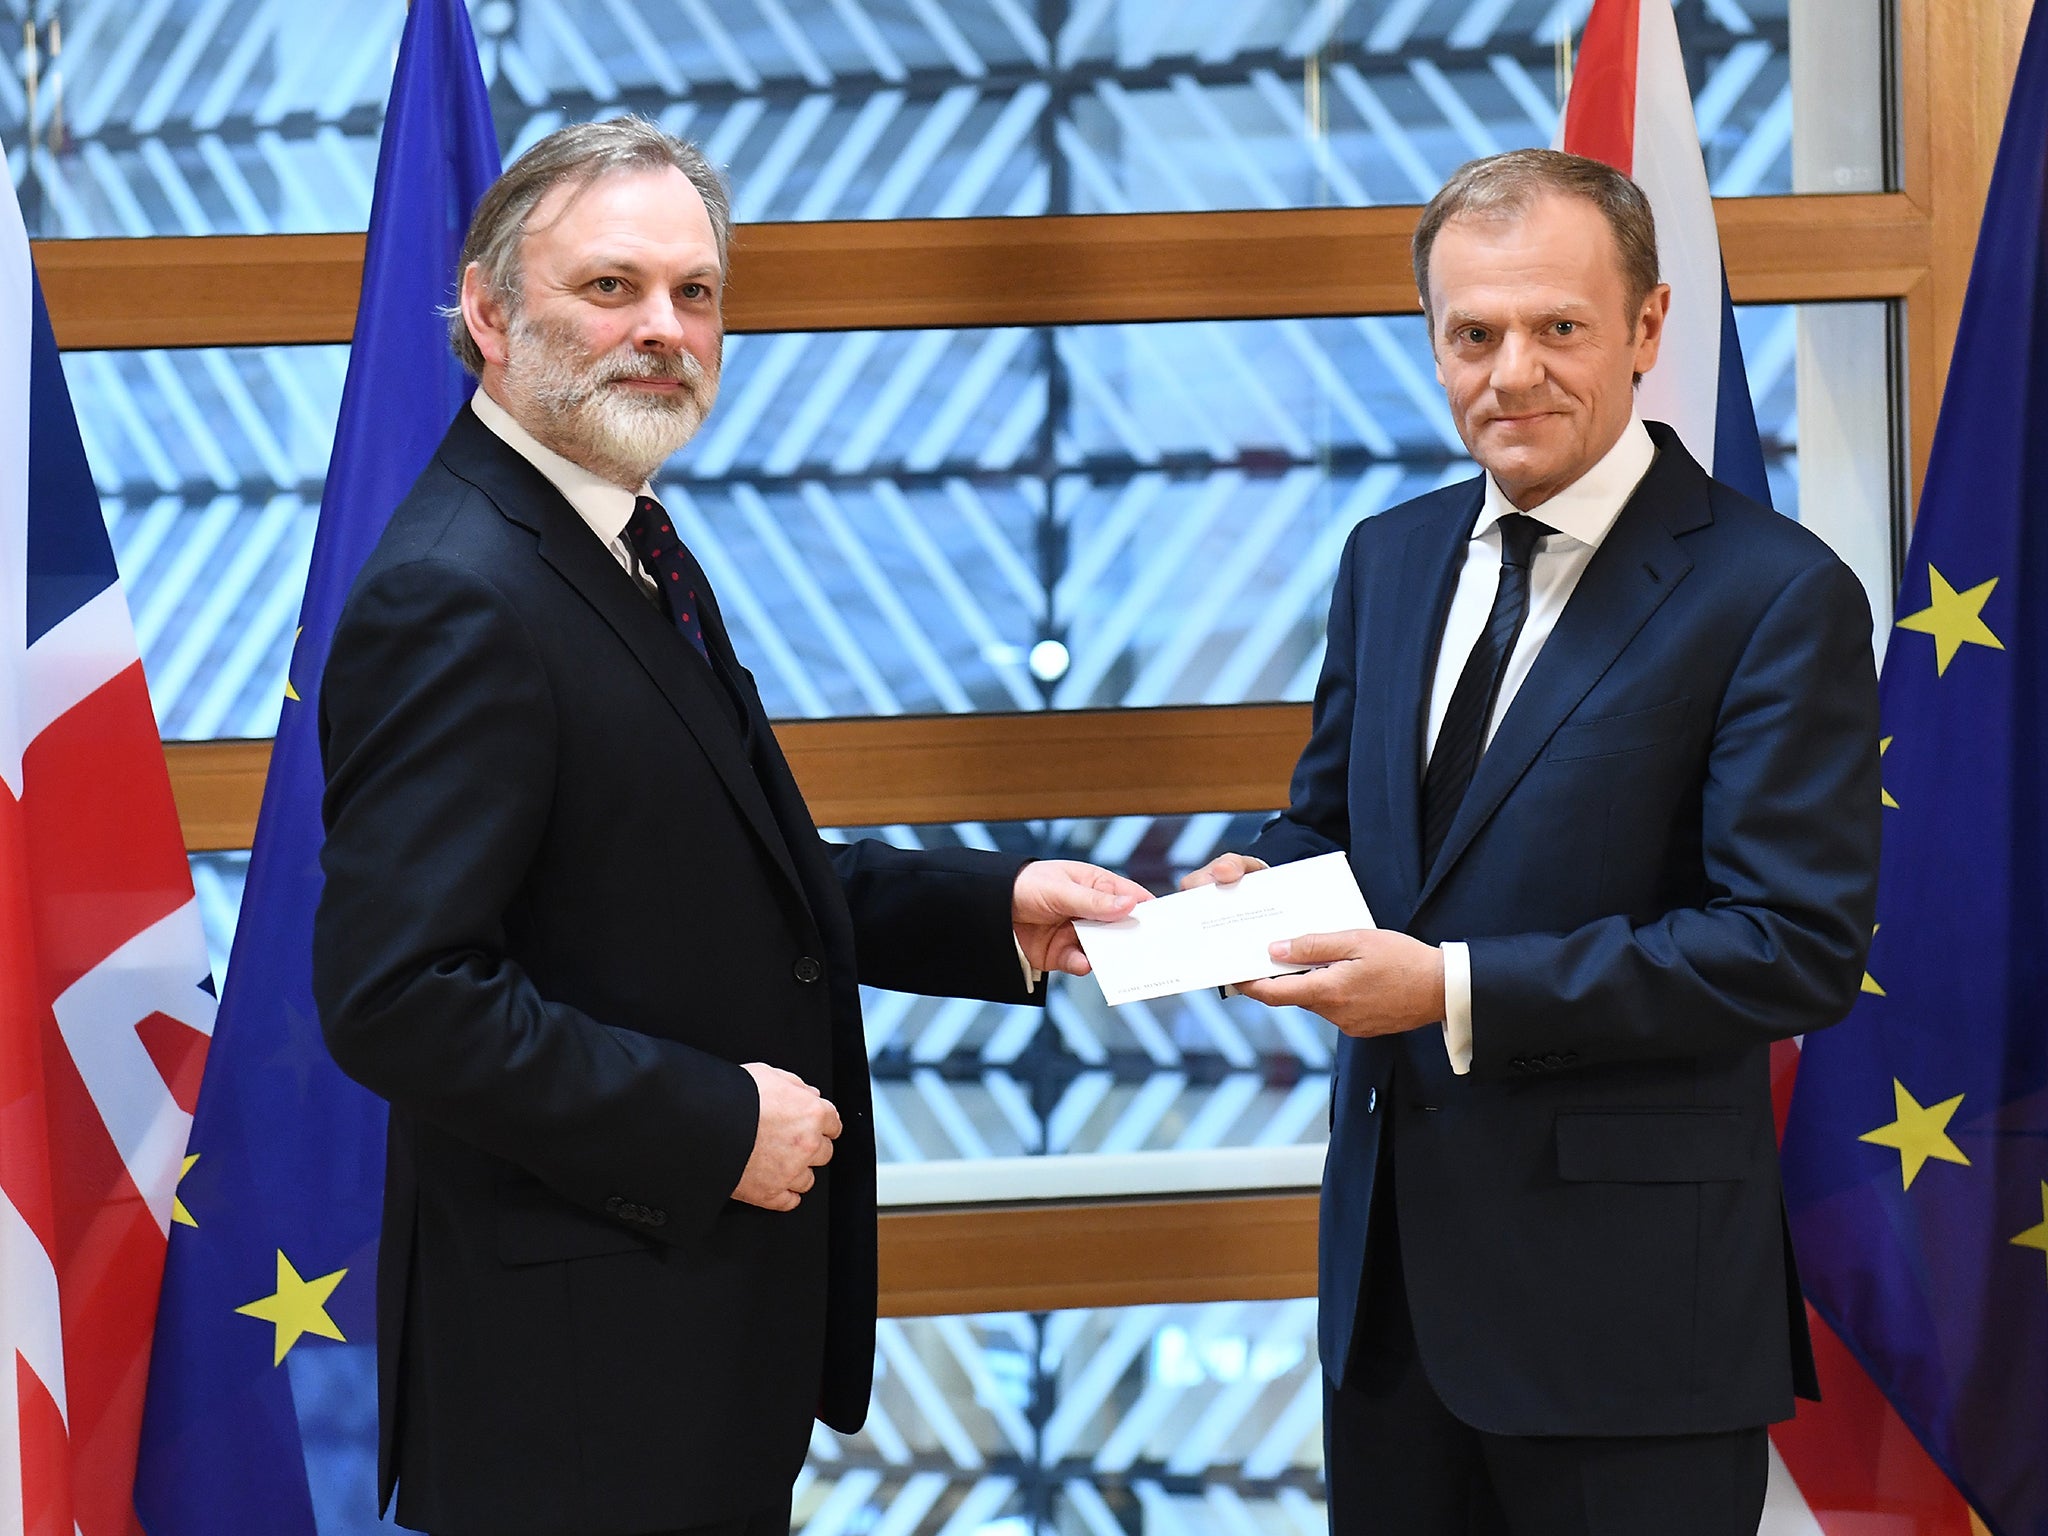 British ambassador to the EU, Sir Tim Barrow delivers the official notice under Article 50 of the Lisbon Treaty to European Council President Donald Tusk in Brussels, Belgium